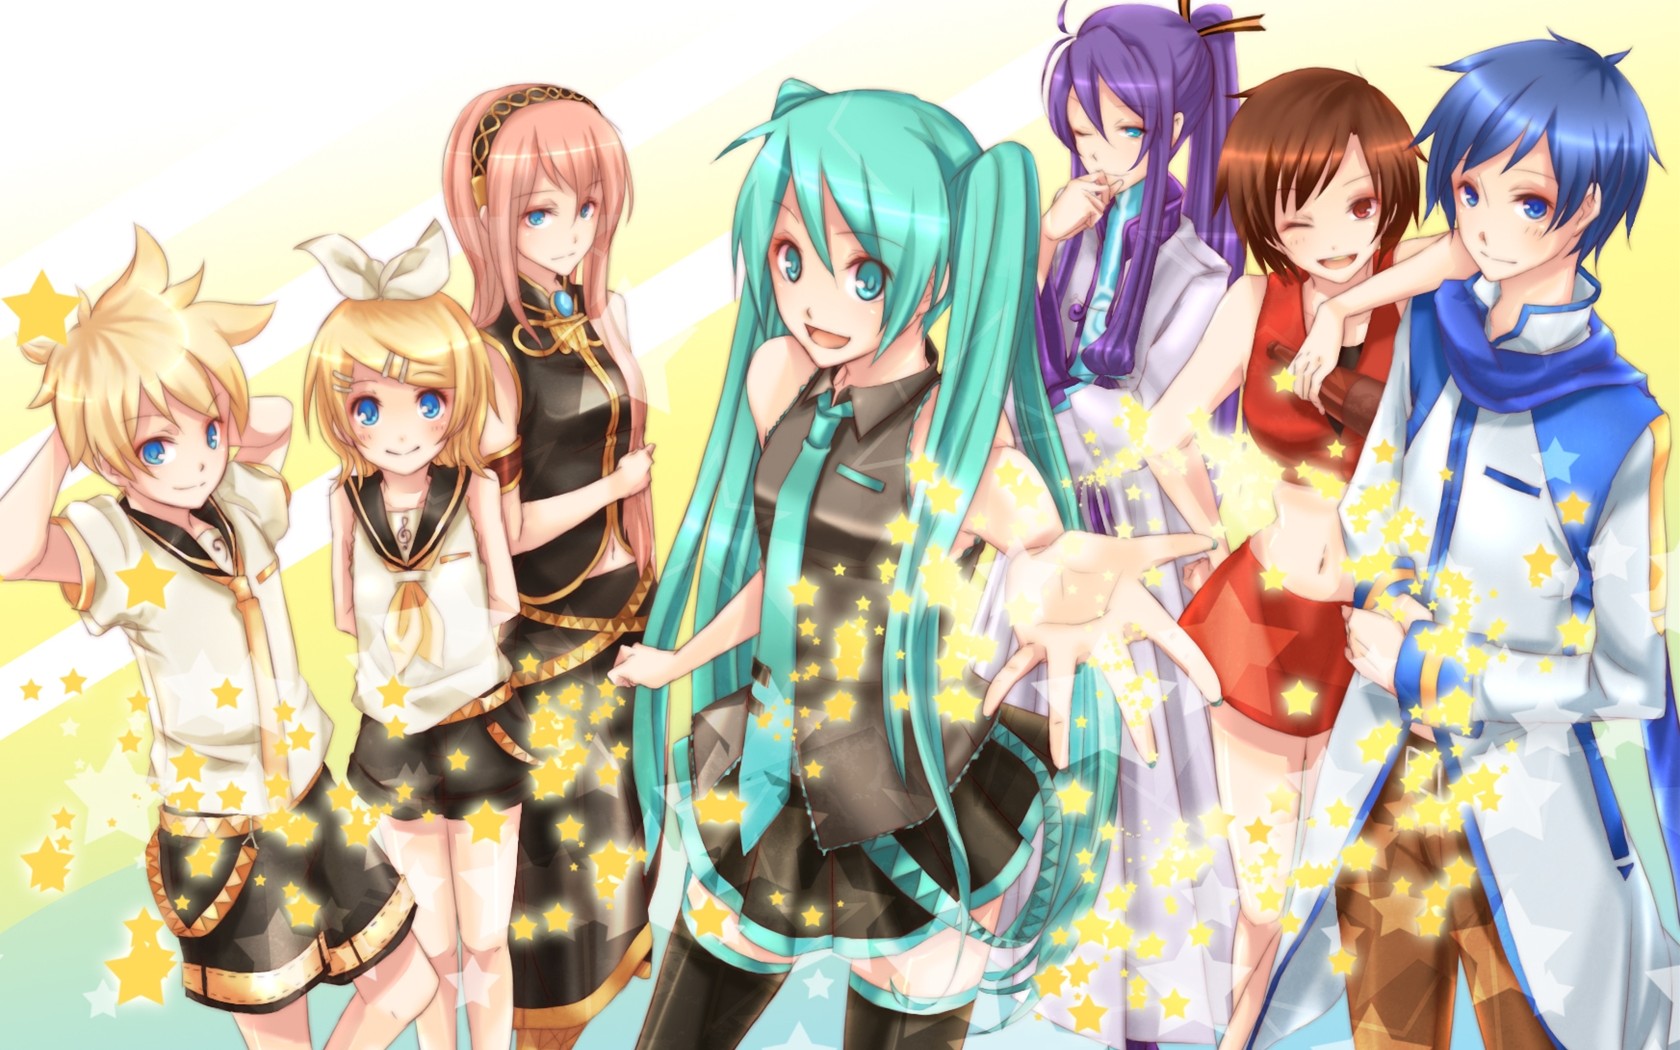 Vocaloid ボーカロイド 壁紙家 初音ミク その他複数 壁紙no 90